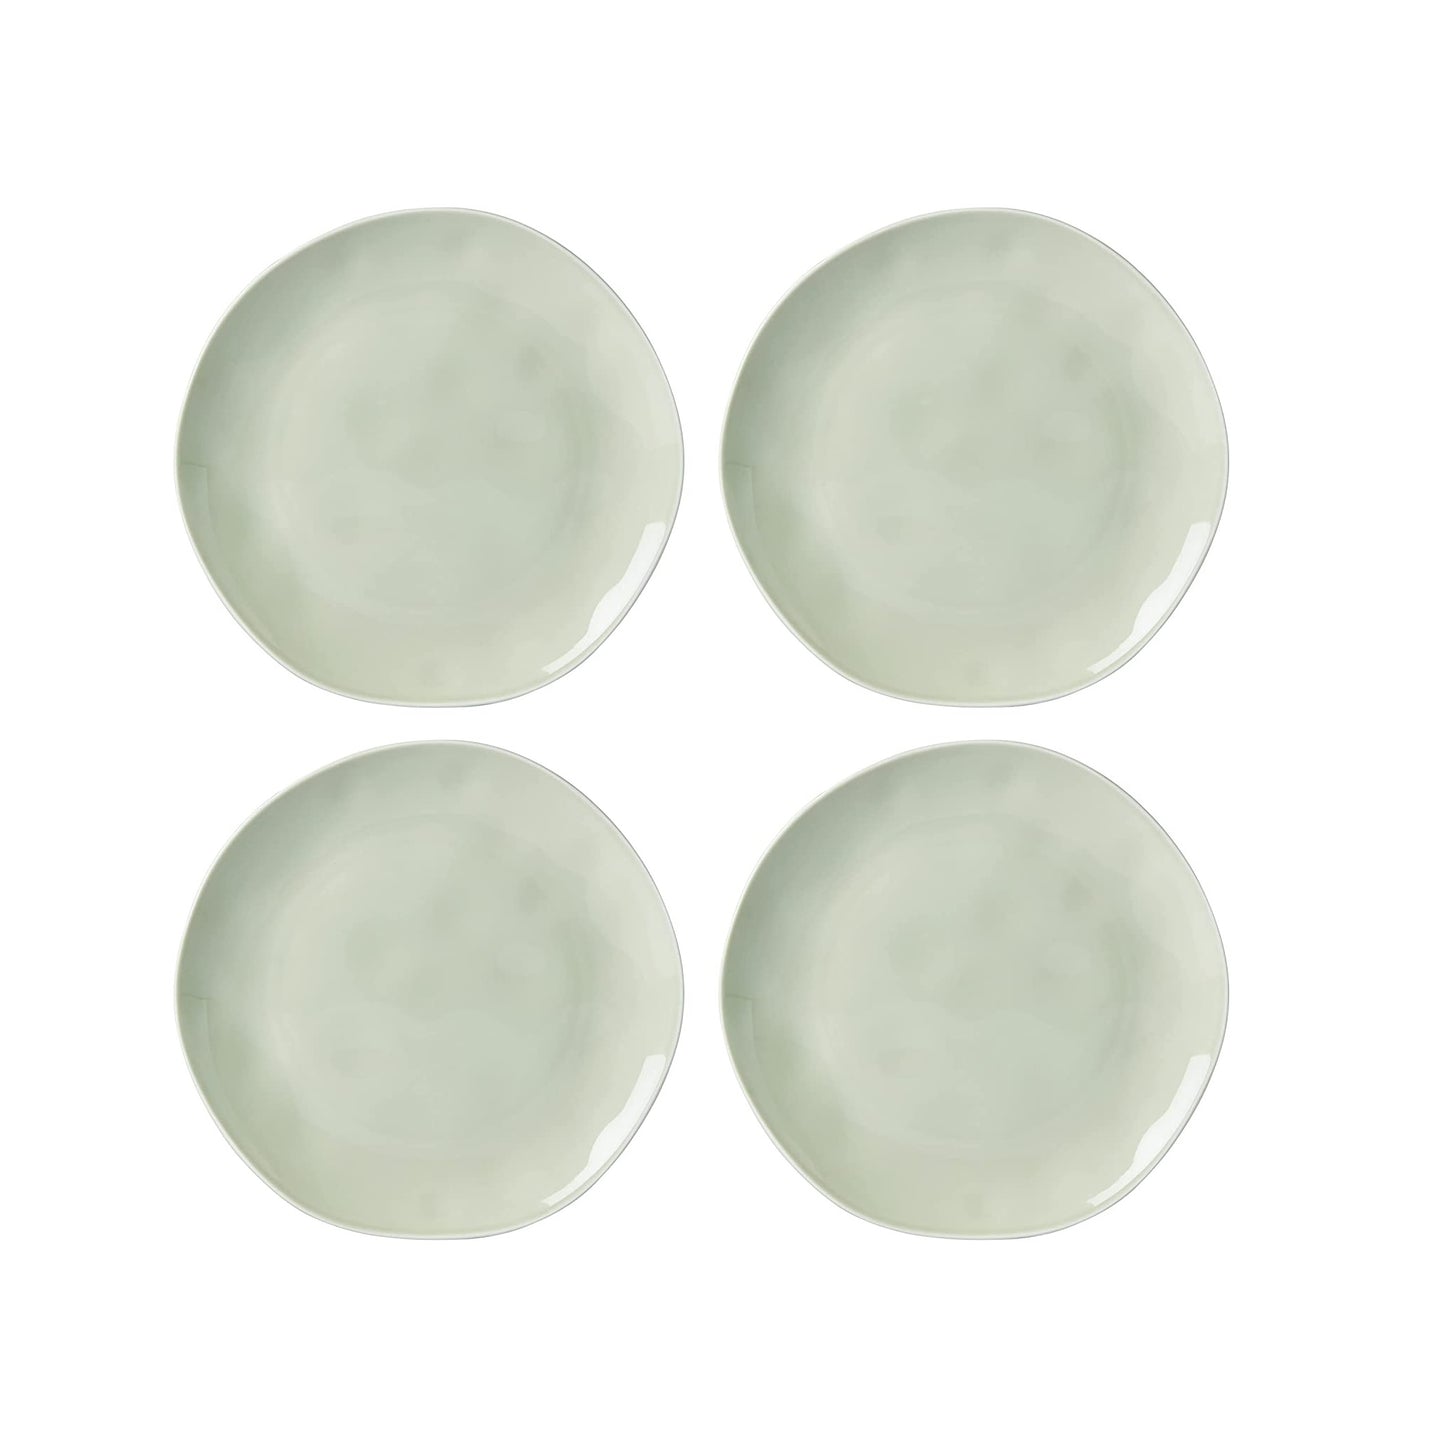 Bay Colors 4 Piece Dinner Plate Gray Set by Lenox